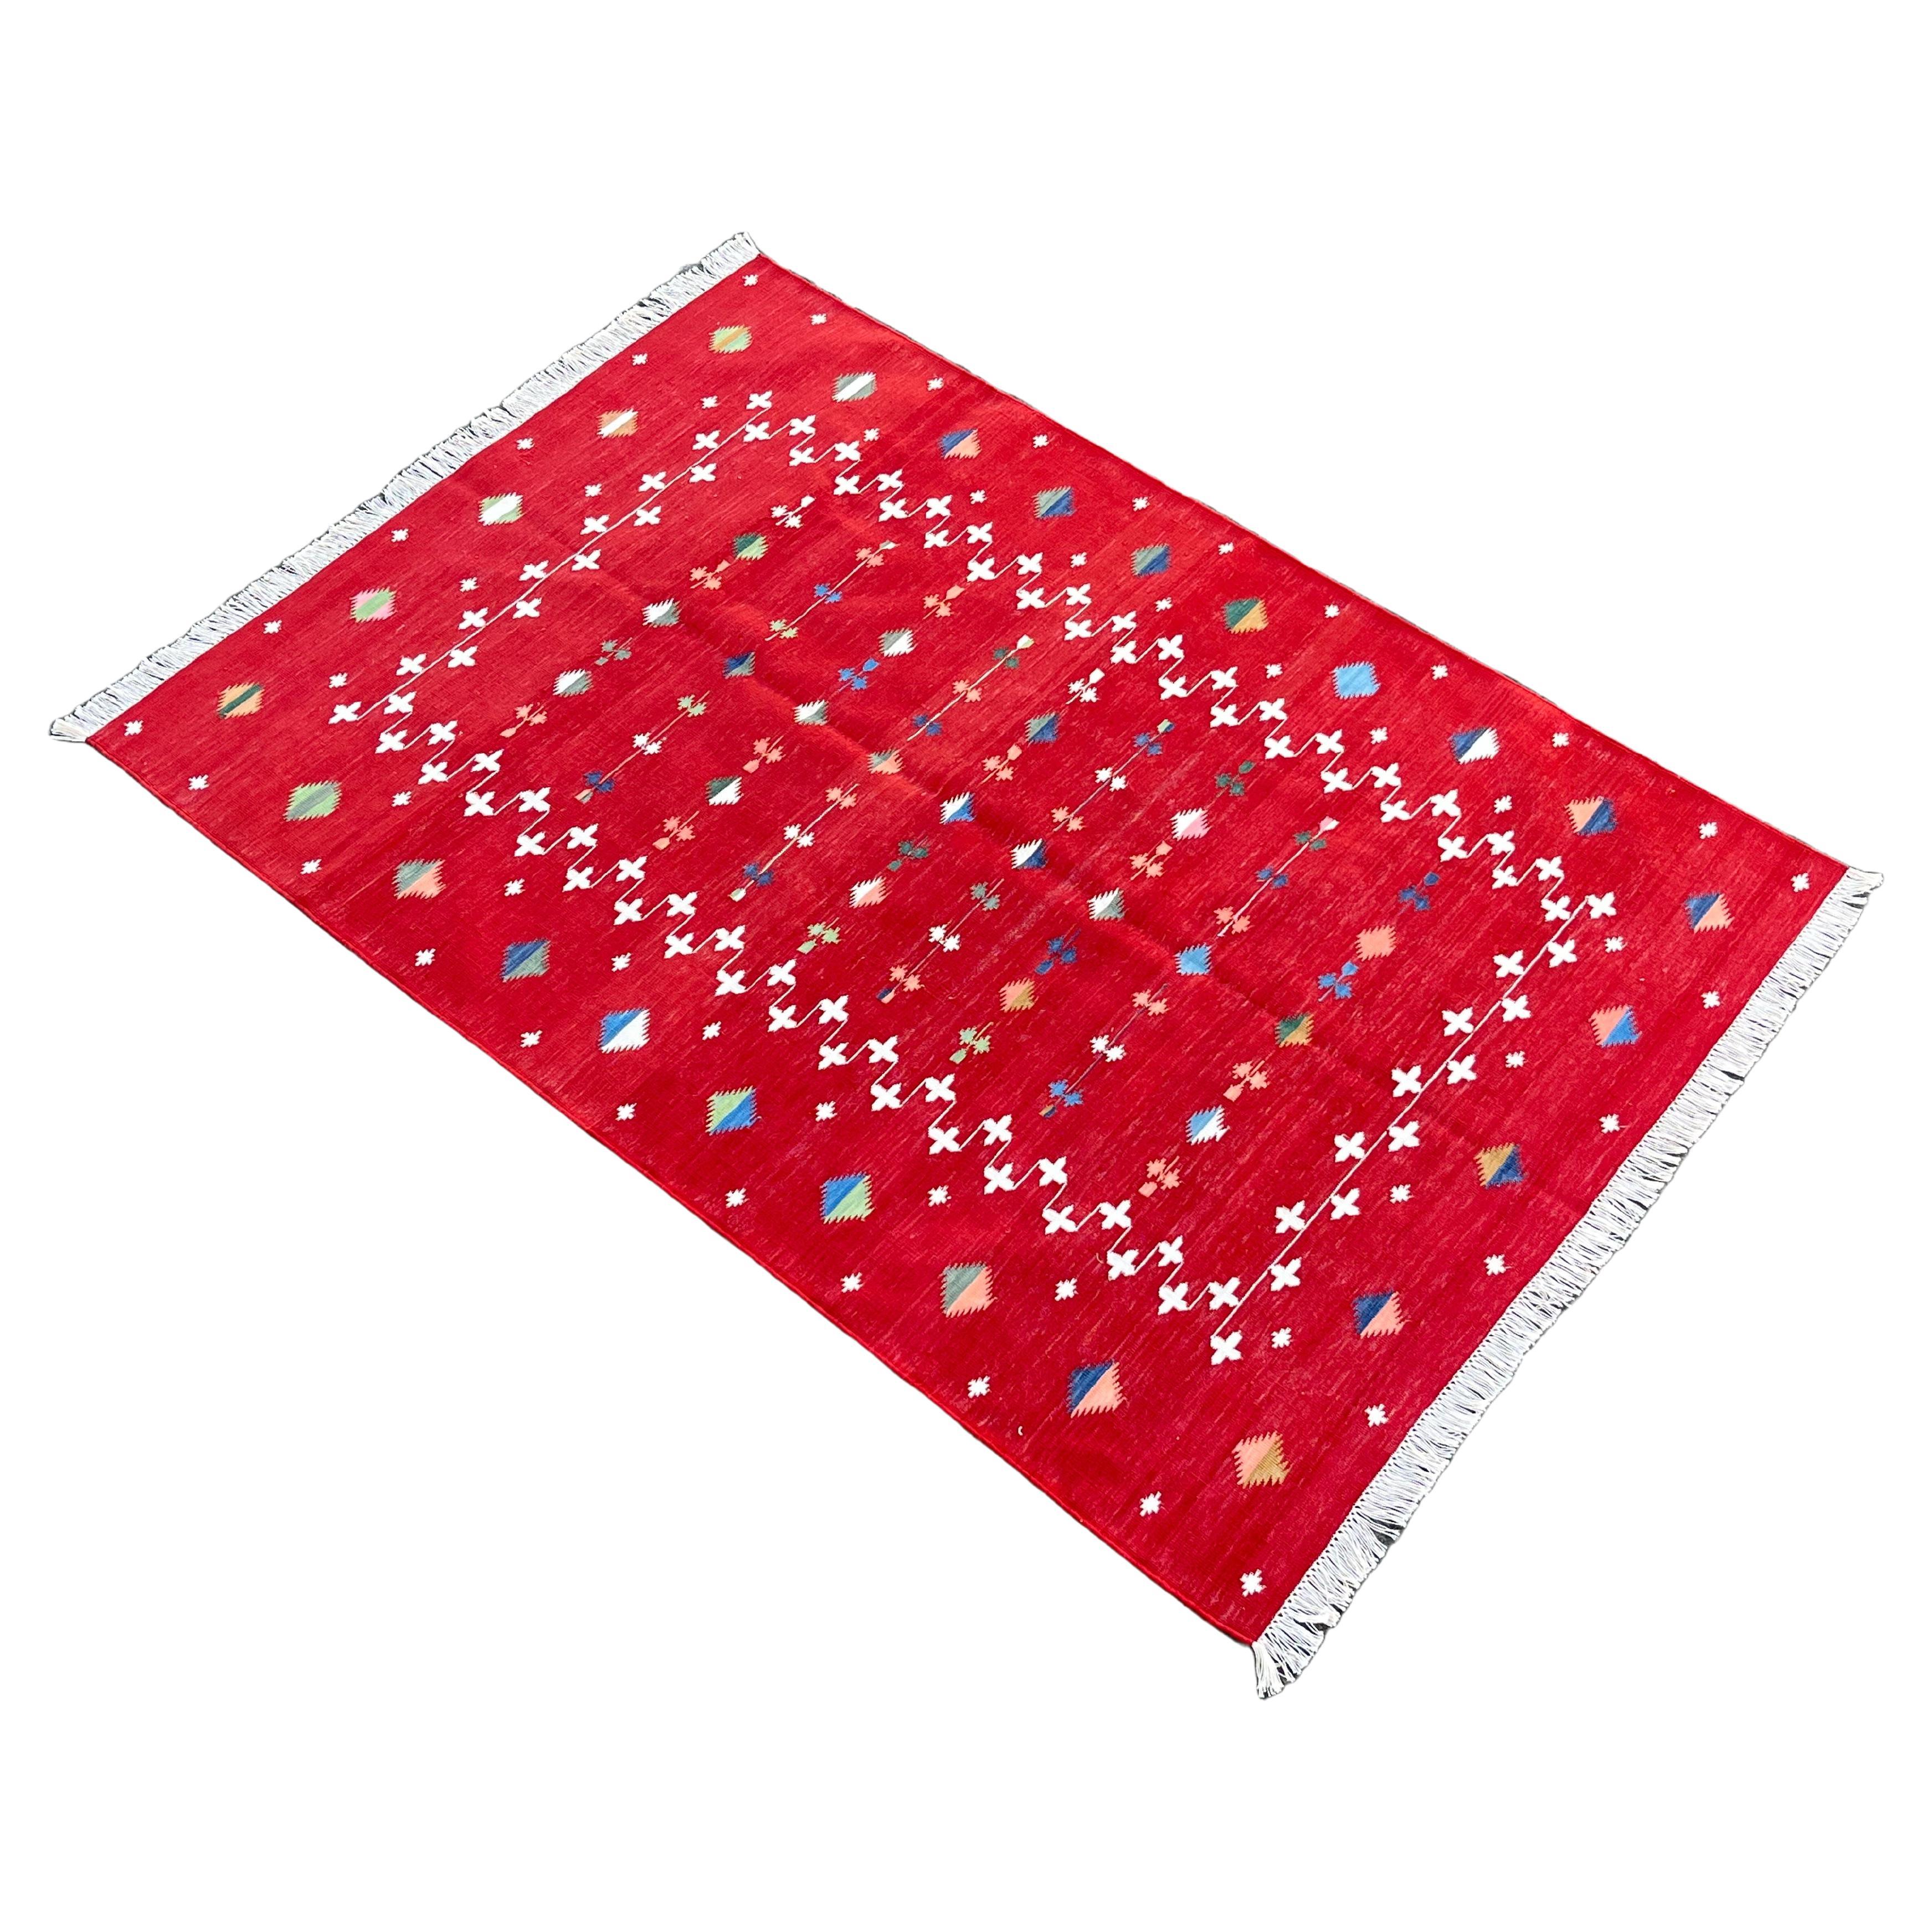 Handmade Cotton Area Flat Weave Rug, 4x6 Red And White Shooting Star Dhurrie Rug